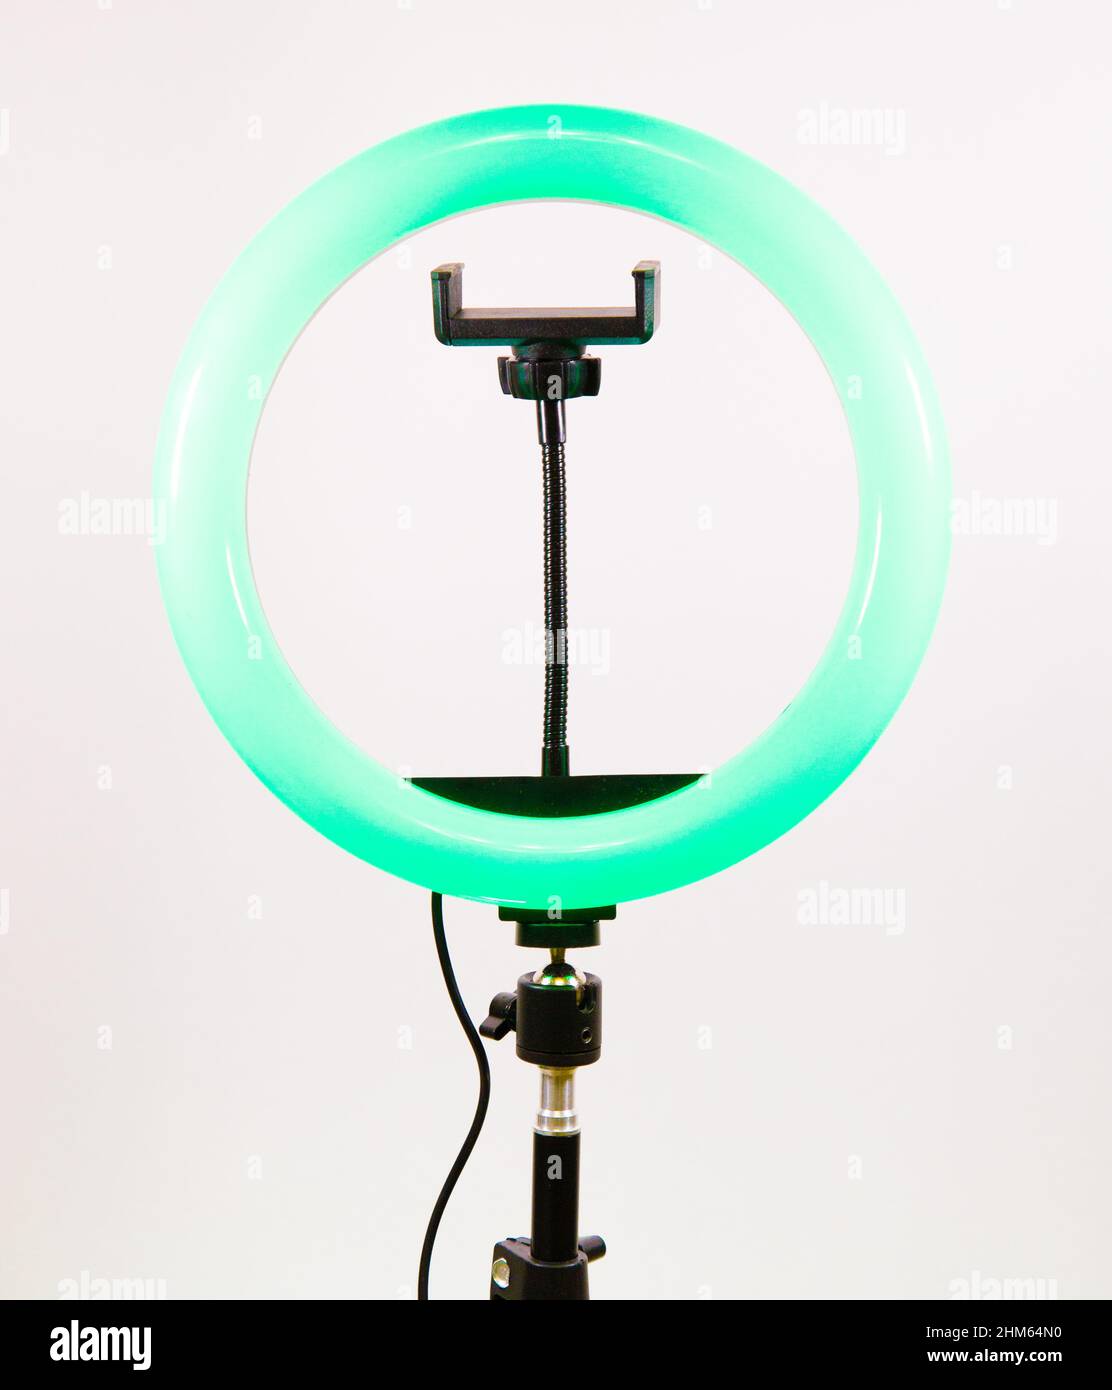 Round lamp with a smartphone holder. Green light. Stock Photo